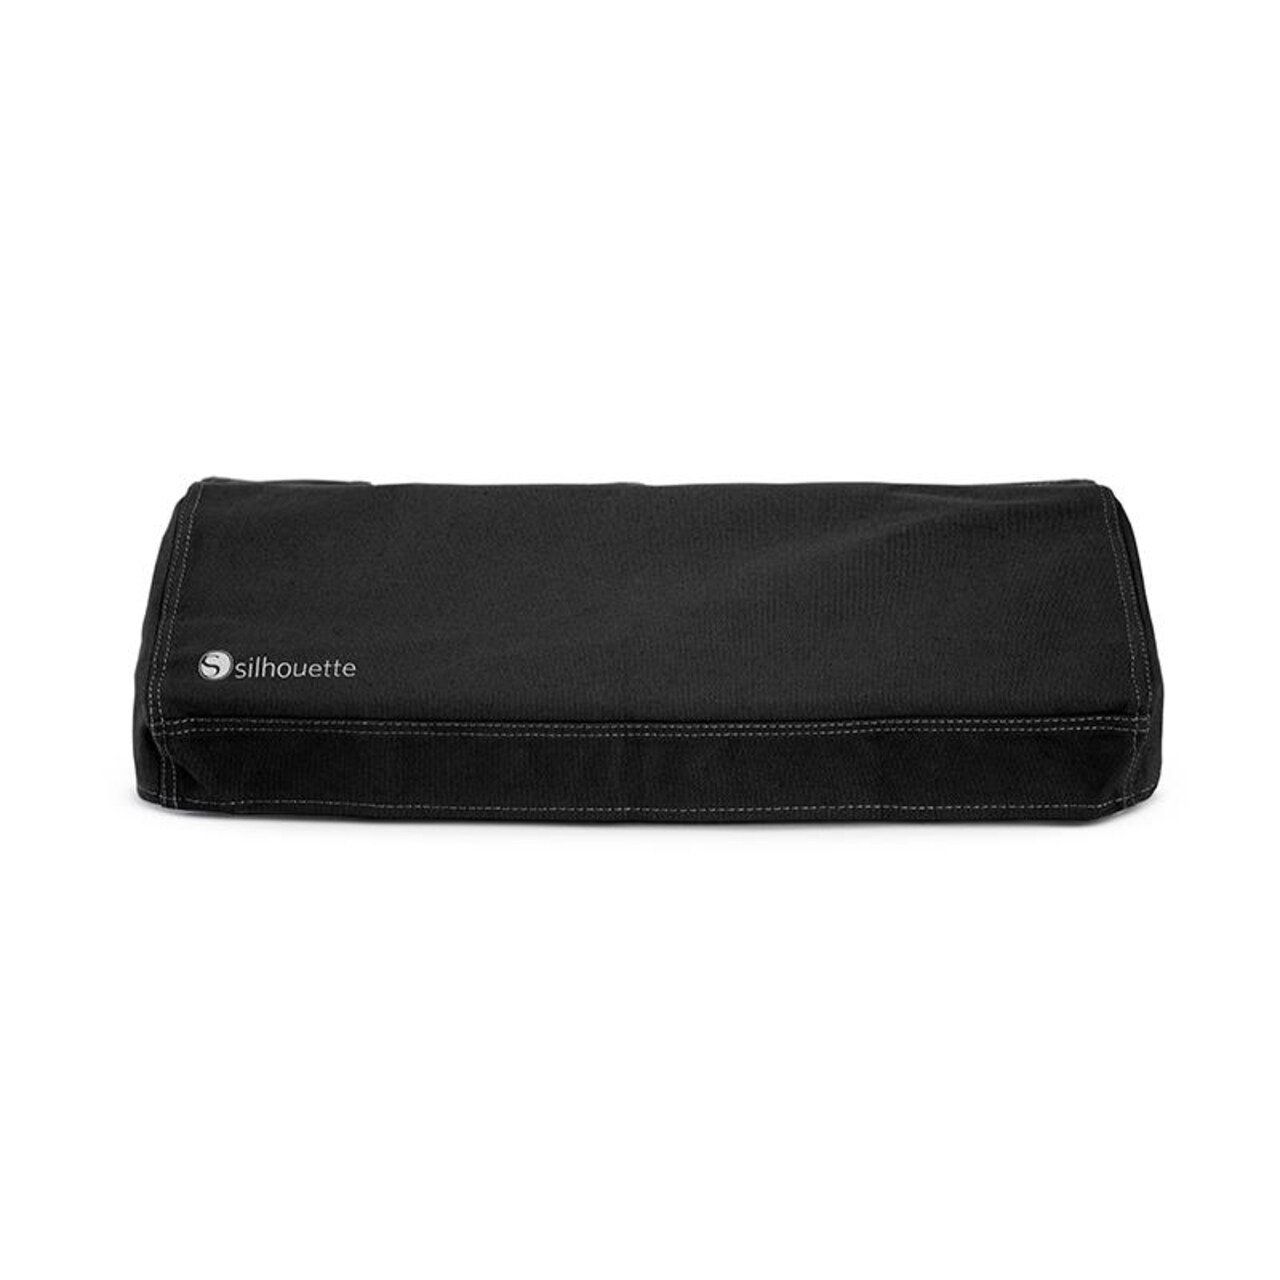 Cameo 4 dust cover - black